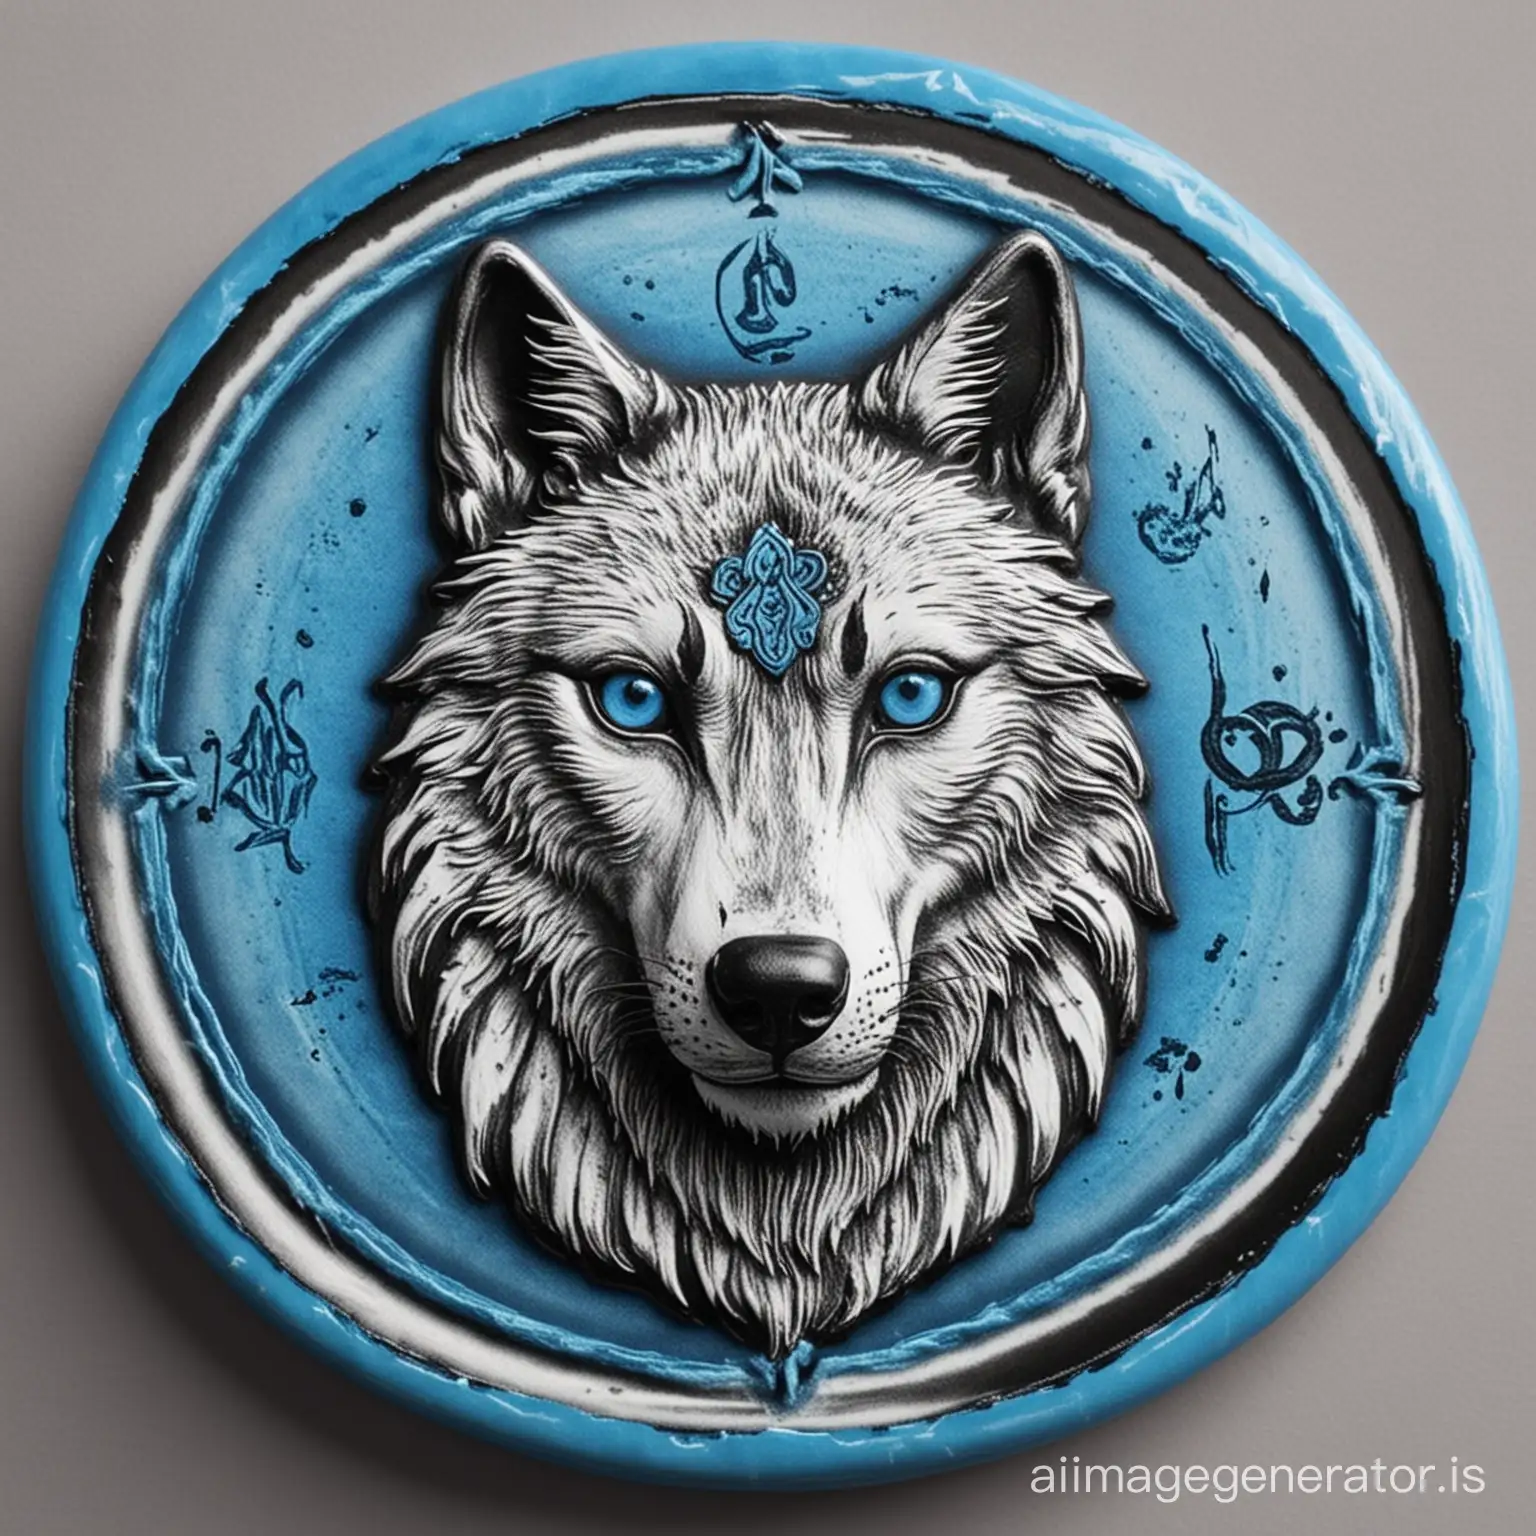 blue-black-white round seal with a wolf's head